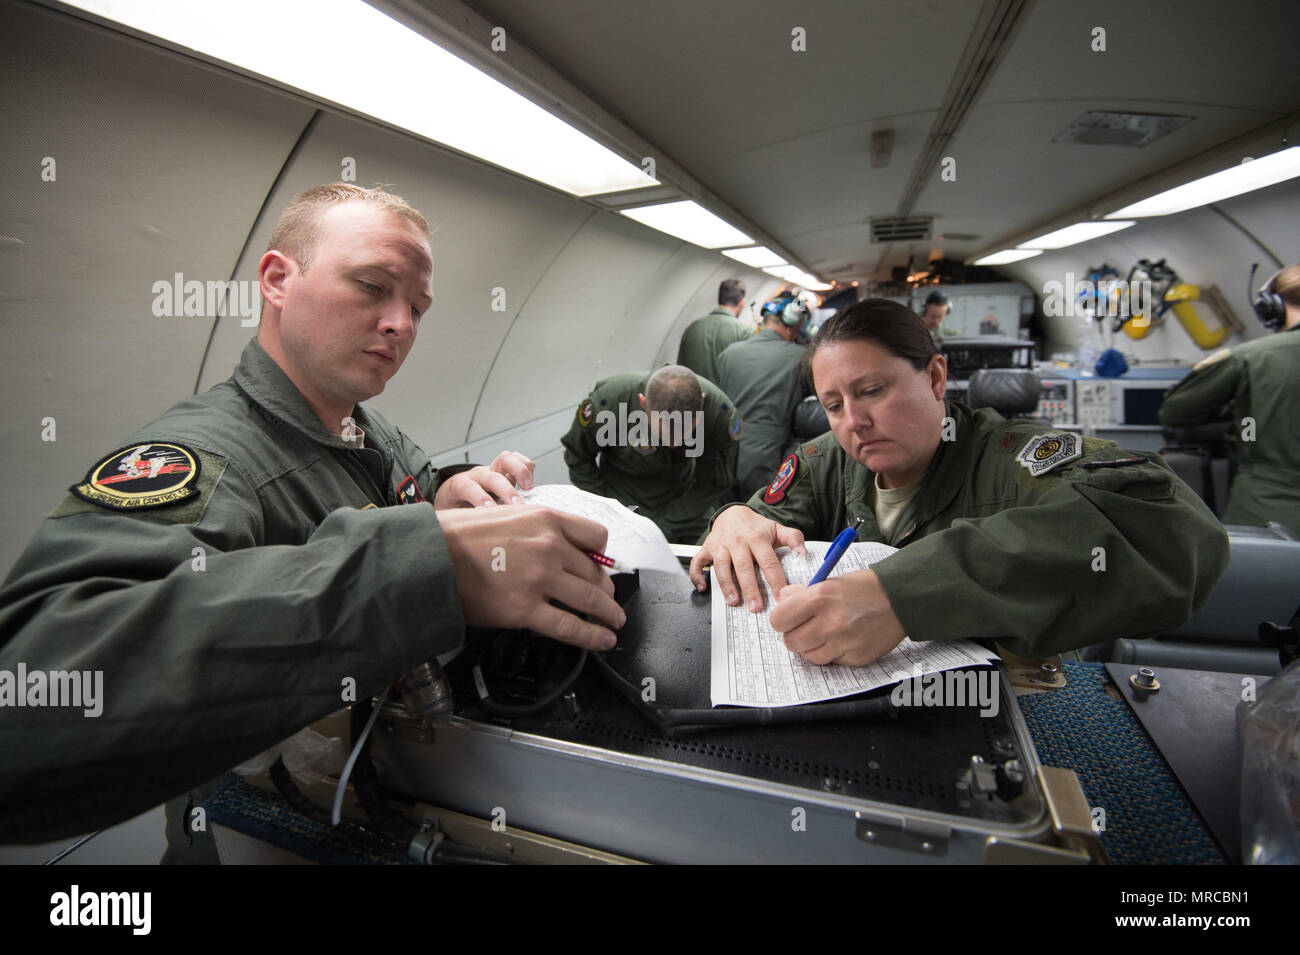 Senior Airman Dustin Tompkins, assigned to the 970th Airborne Air Control Squadron, and Maj. Anne Ridlon, from the 513th Operations Support Squadron, make notes during pre-flight preparations on board an E-3 Sentry Airborne Warning and Control System aircraft June 6, 2017, at NATO Air Base Geilenkirchen, Germany. Both Airmen are a part of the nearly 100 reservists supporting the BALTOPS 2017 exercise, which involves 50 ships and submarines and 40 aircraft from 14 member nations. (U.S. Air Force photo/2nd Lt. Caleb Wanzer) Stock Photo